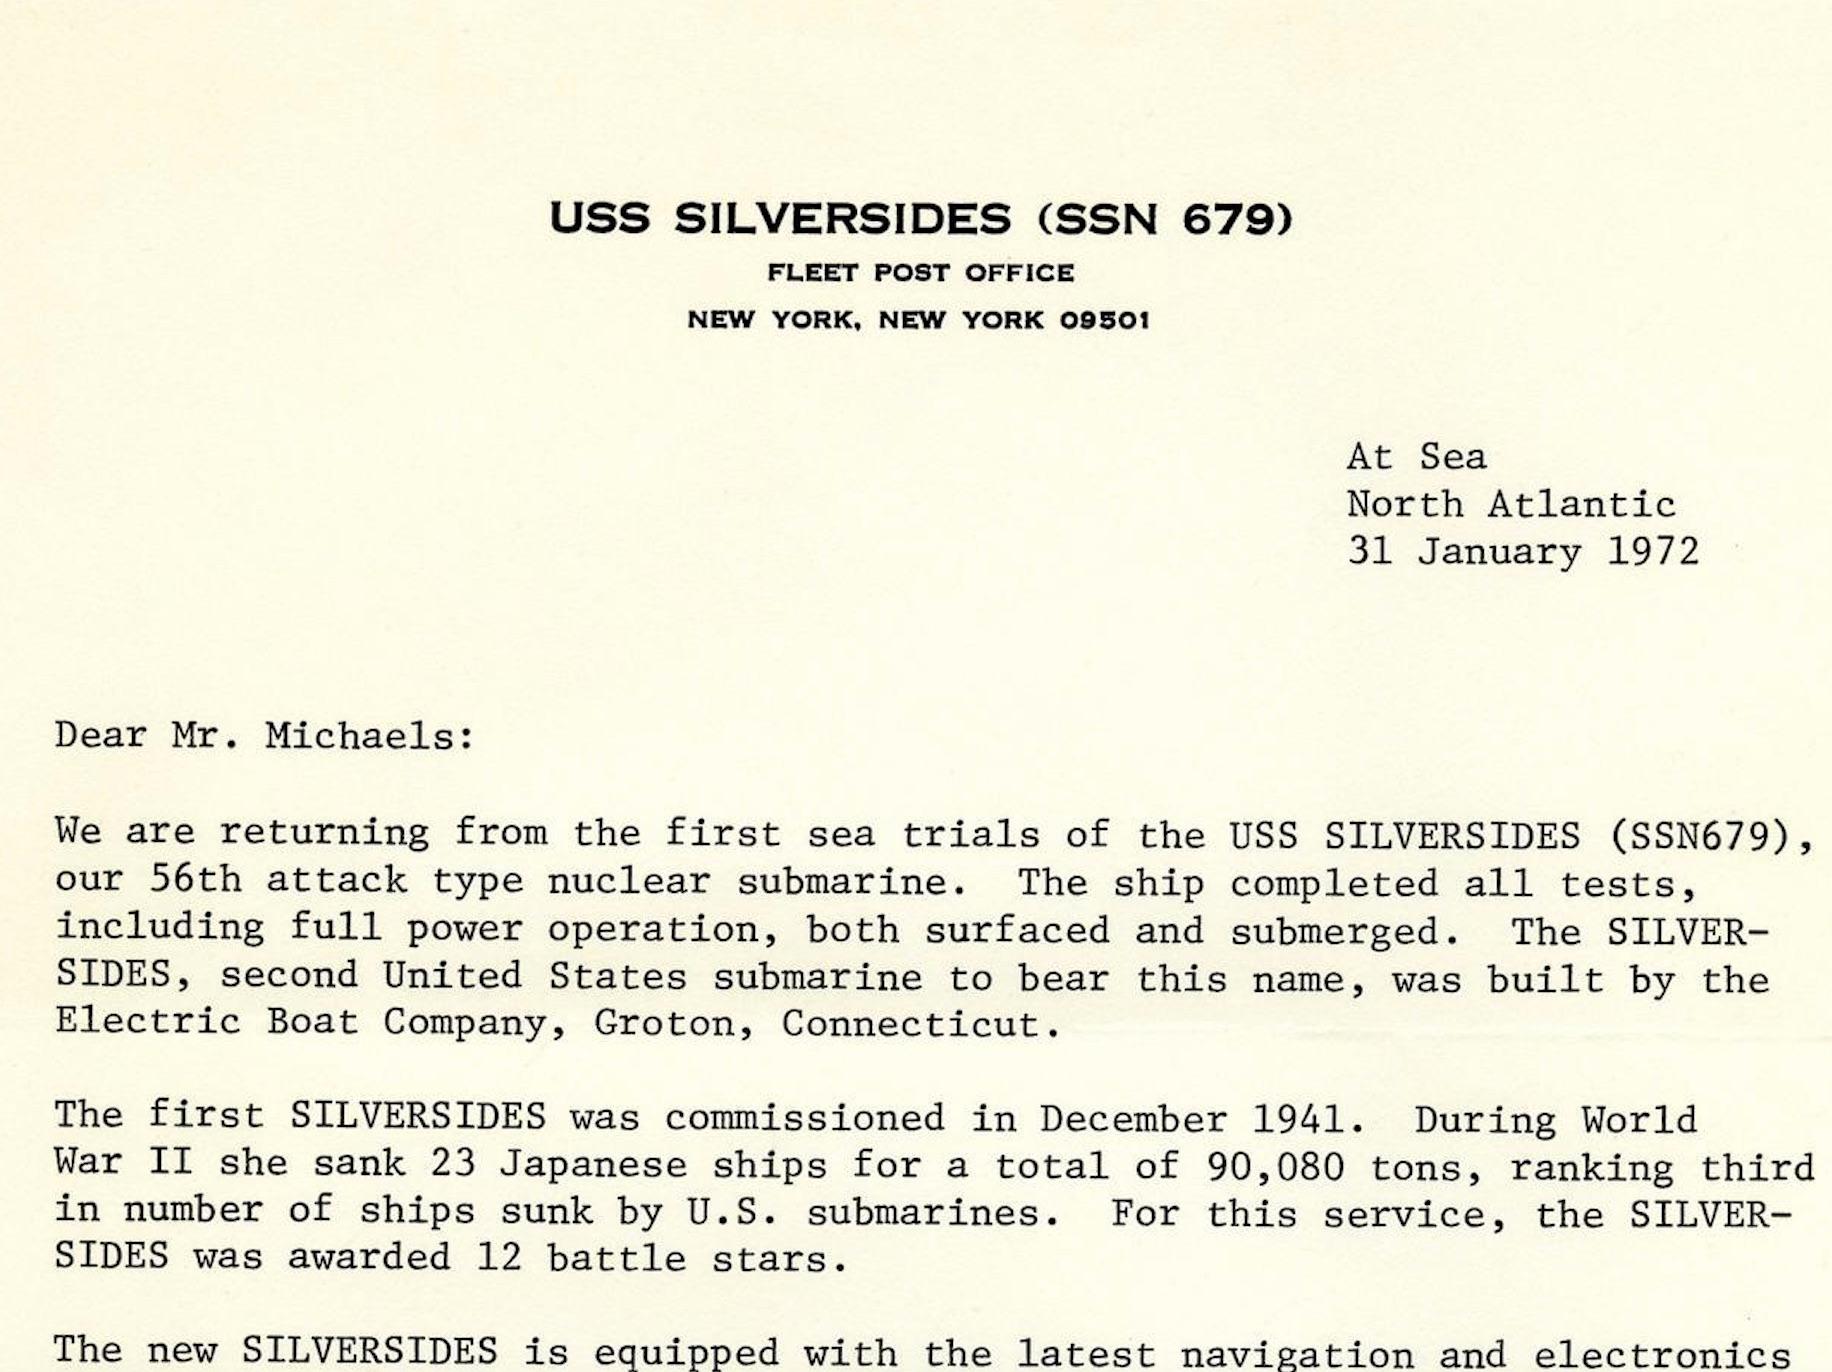 Presented is an original typed and signed letter from Vice Admiral Rickover to Robert L. Michaels, dated January 31, 1972, regarding the capabilities of U.S. nuclear-powered submarines. 

In this interesting letter, Vice Admiral Rickover writes